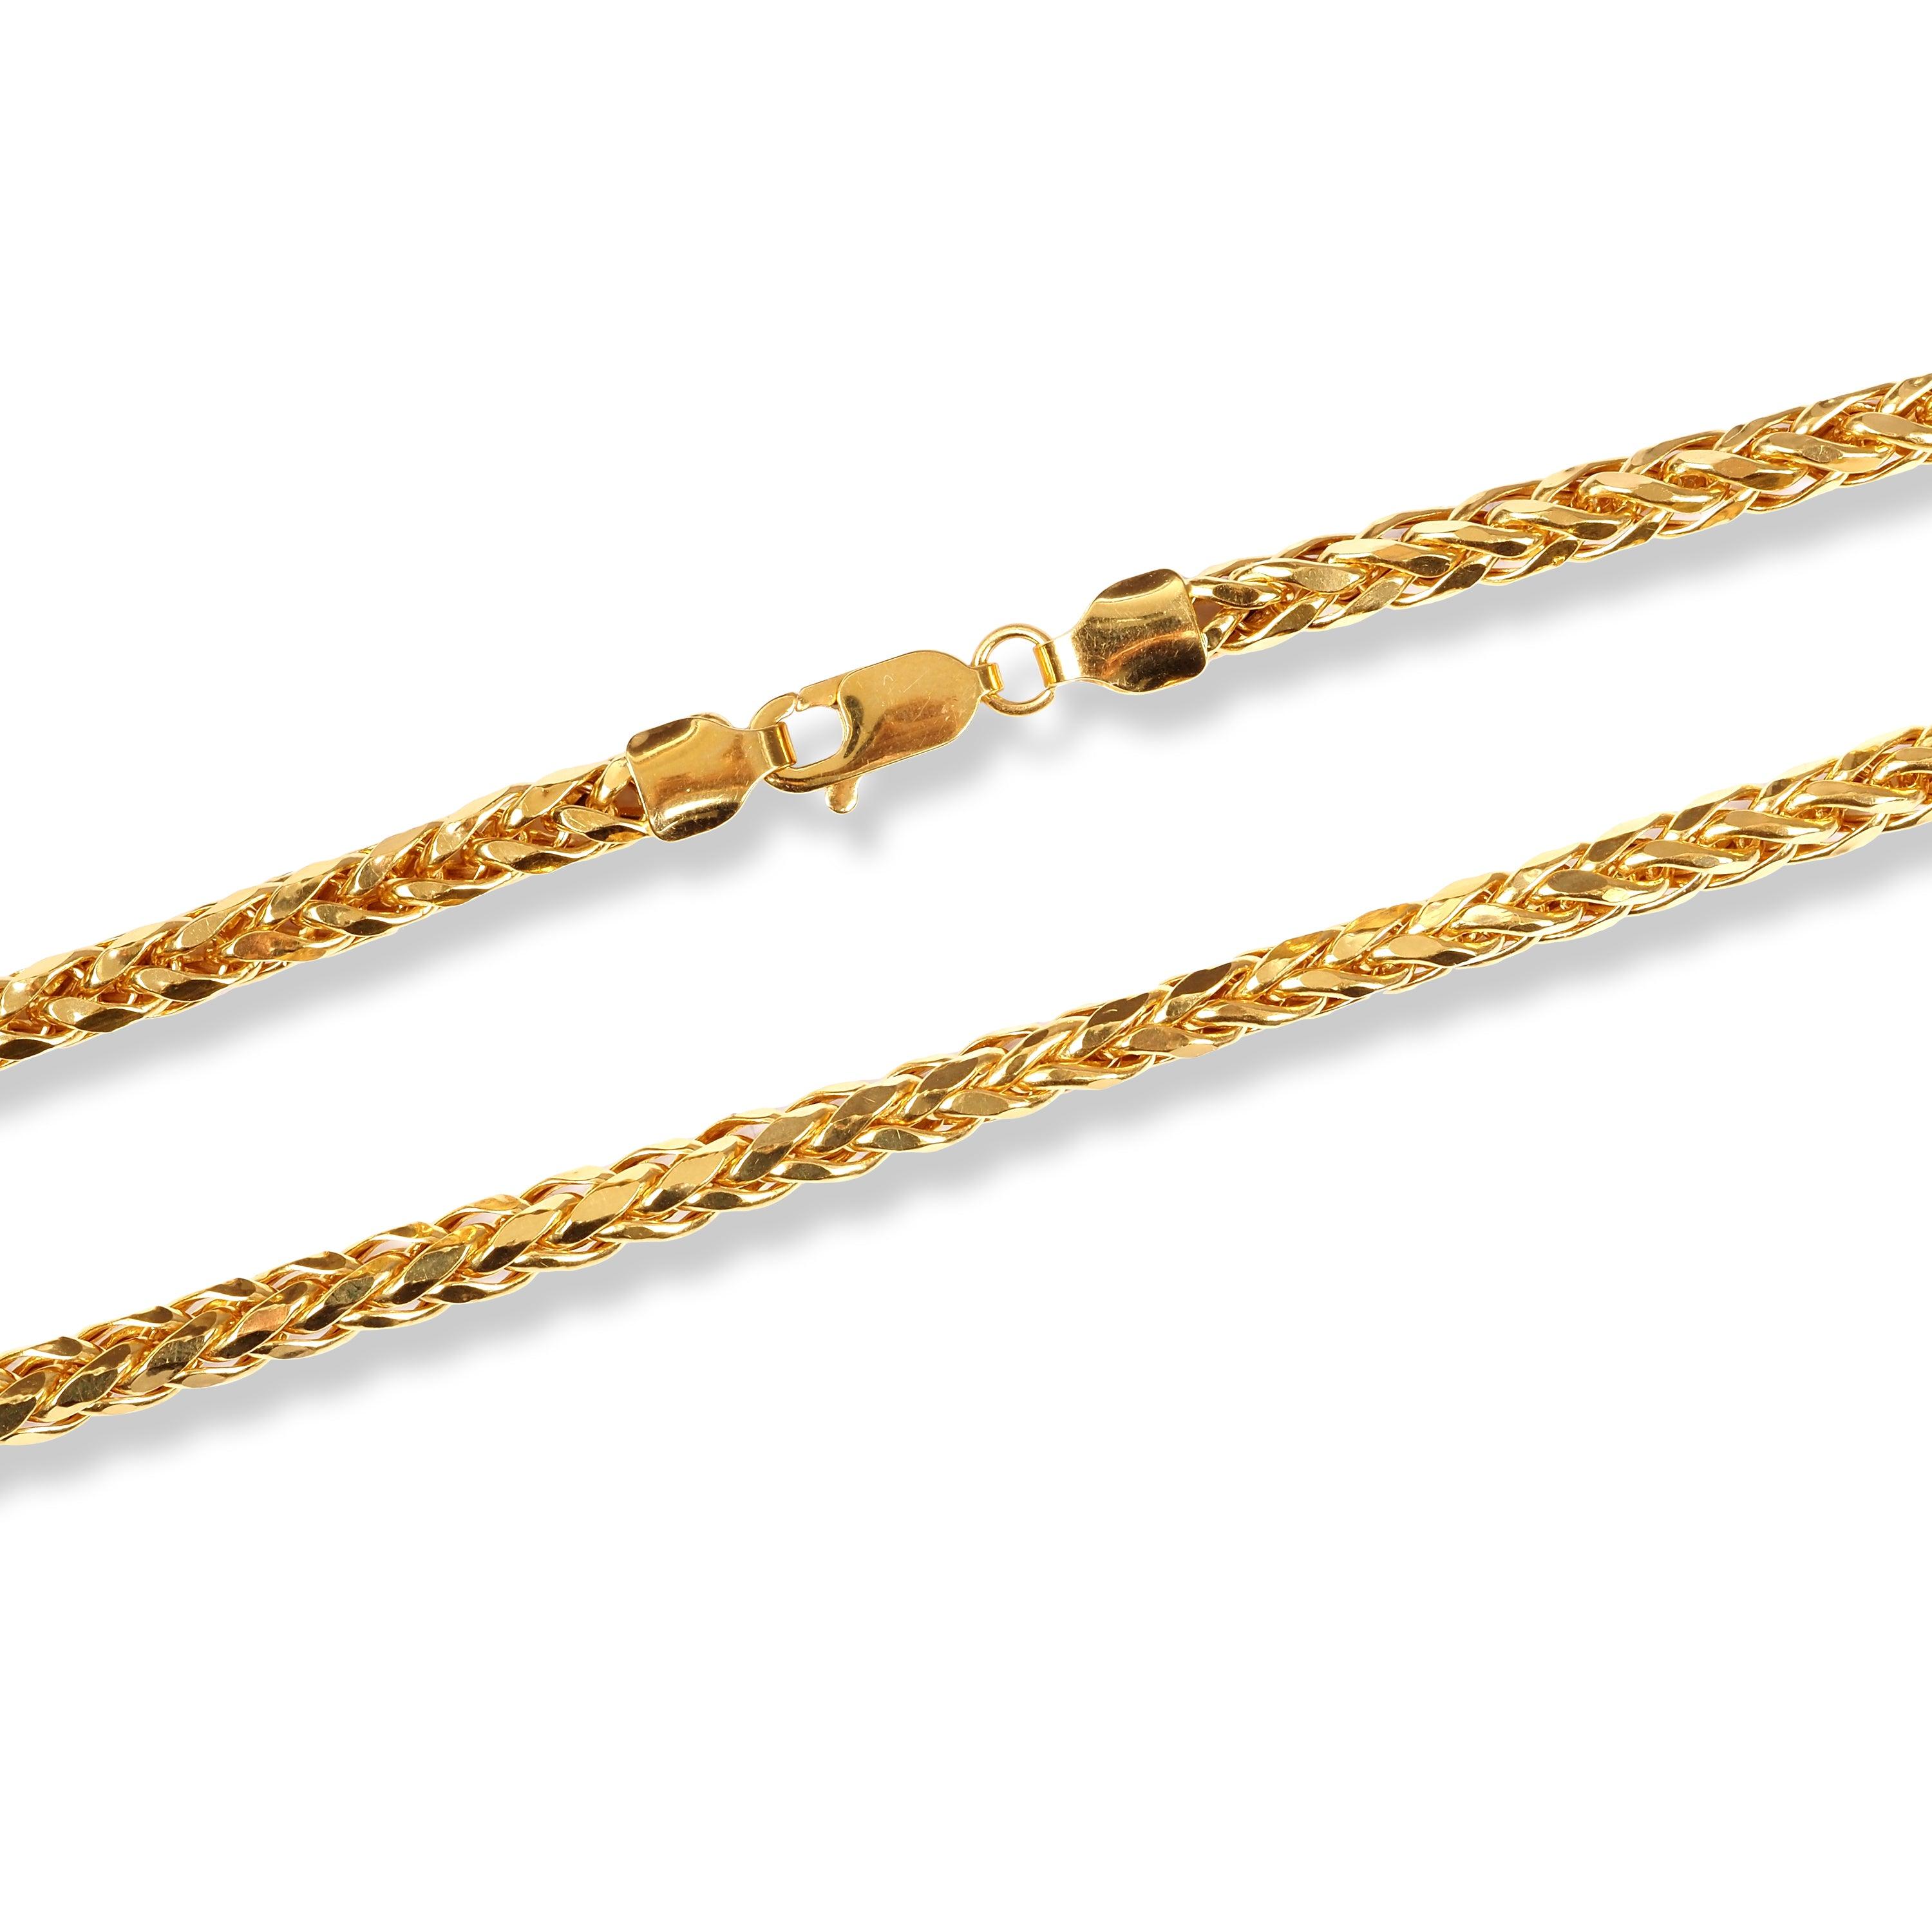 22ct Yellow Gold Filed Spiga Chain With Lobster Clasp C-1219 - Minar Jewellers